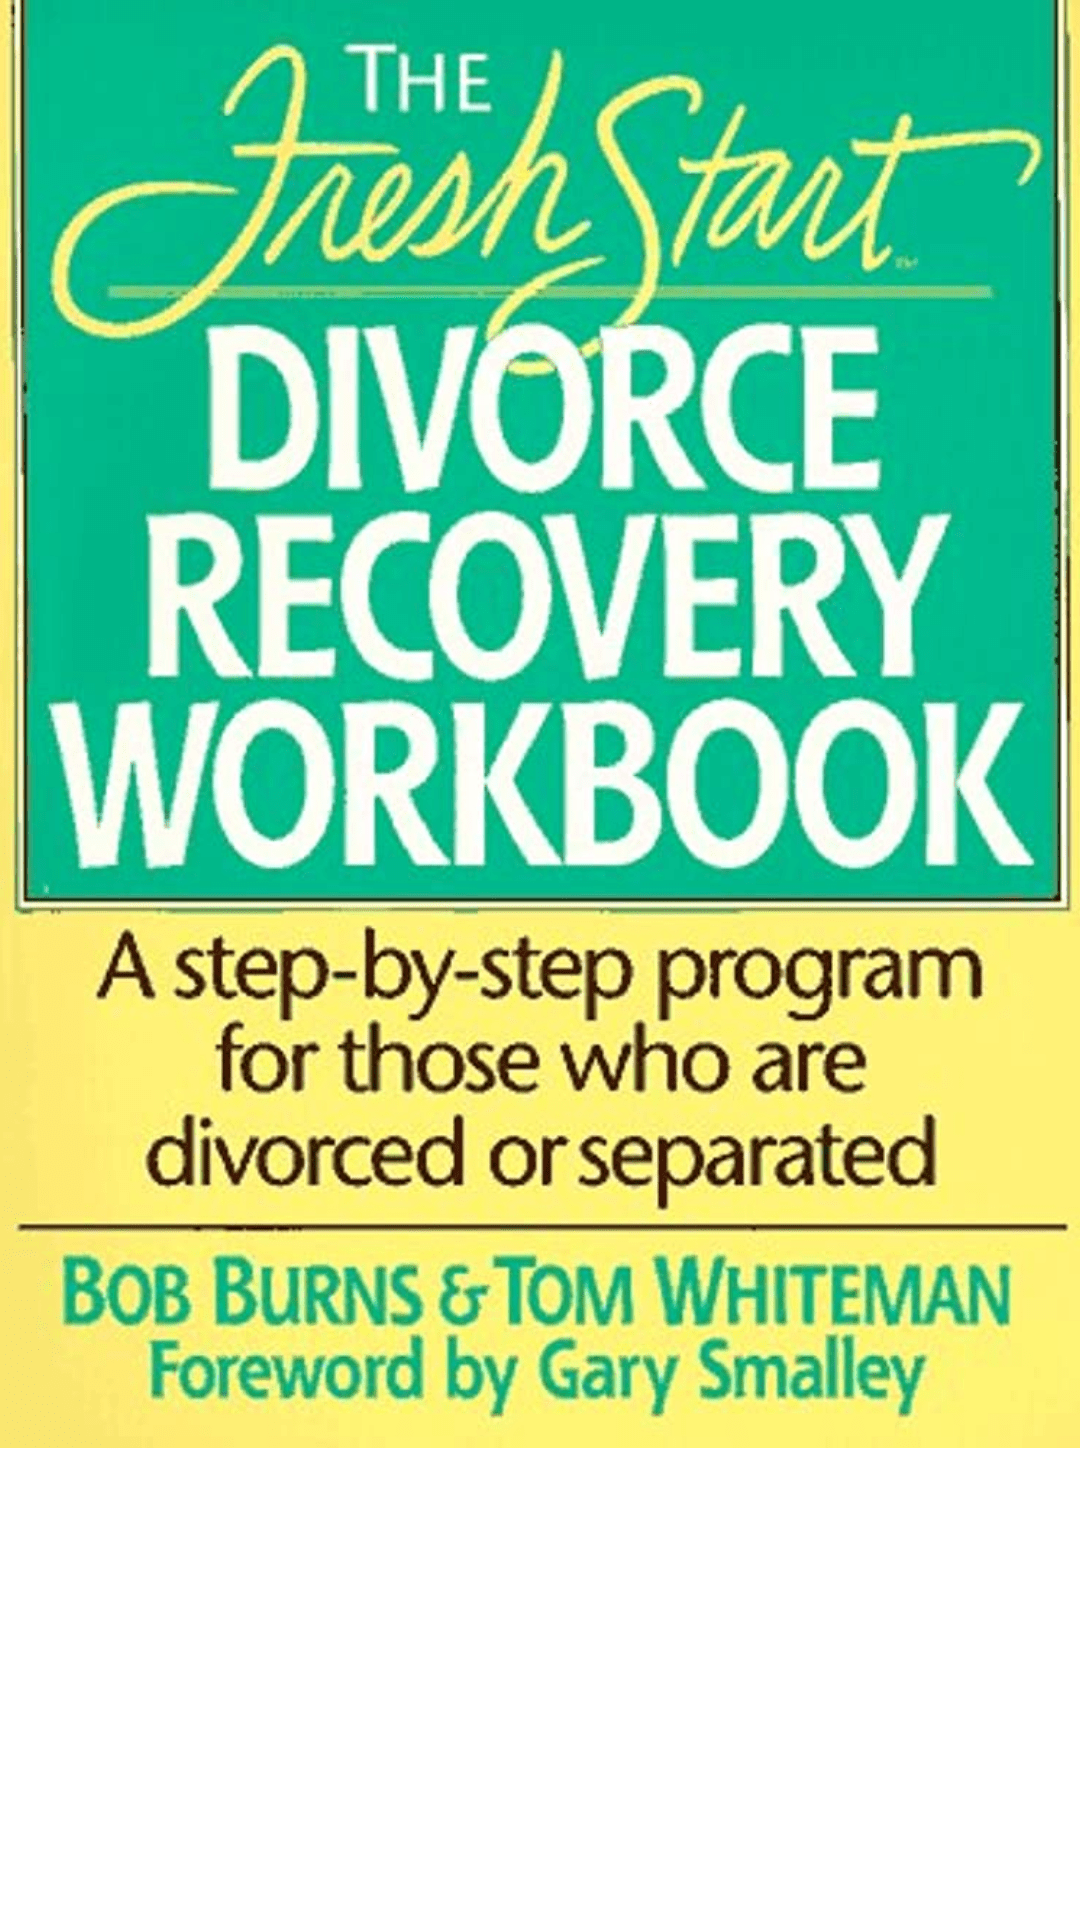 The Fresh Start Divorce Recovery Workbook: A Step-by-Step Program for Those Who Are Divorced or Separated